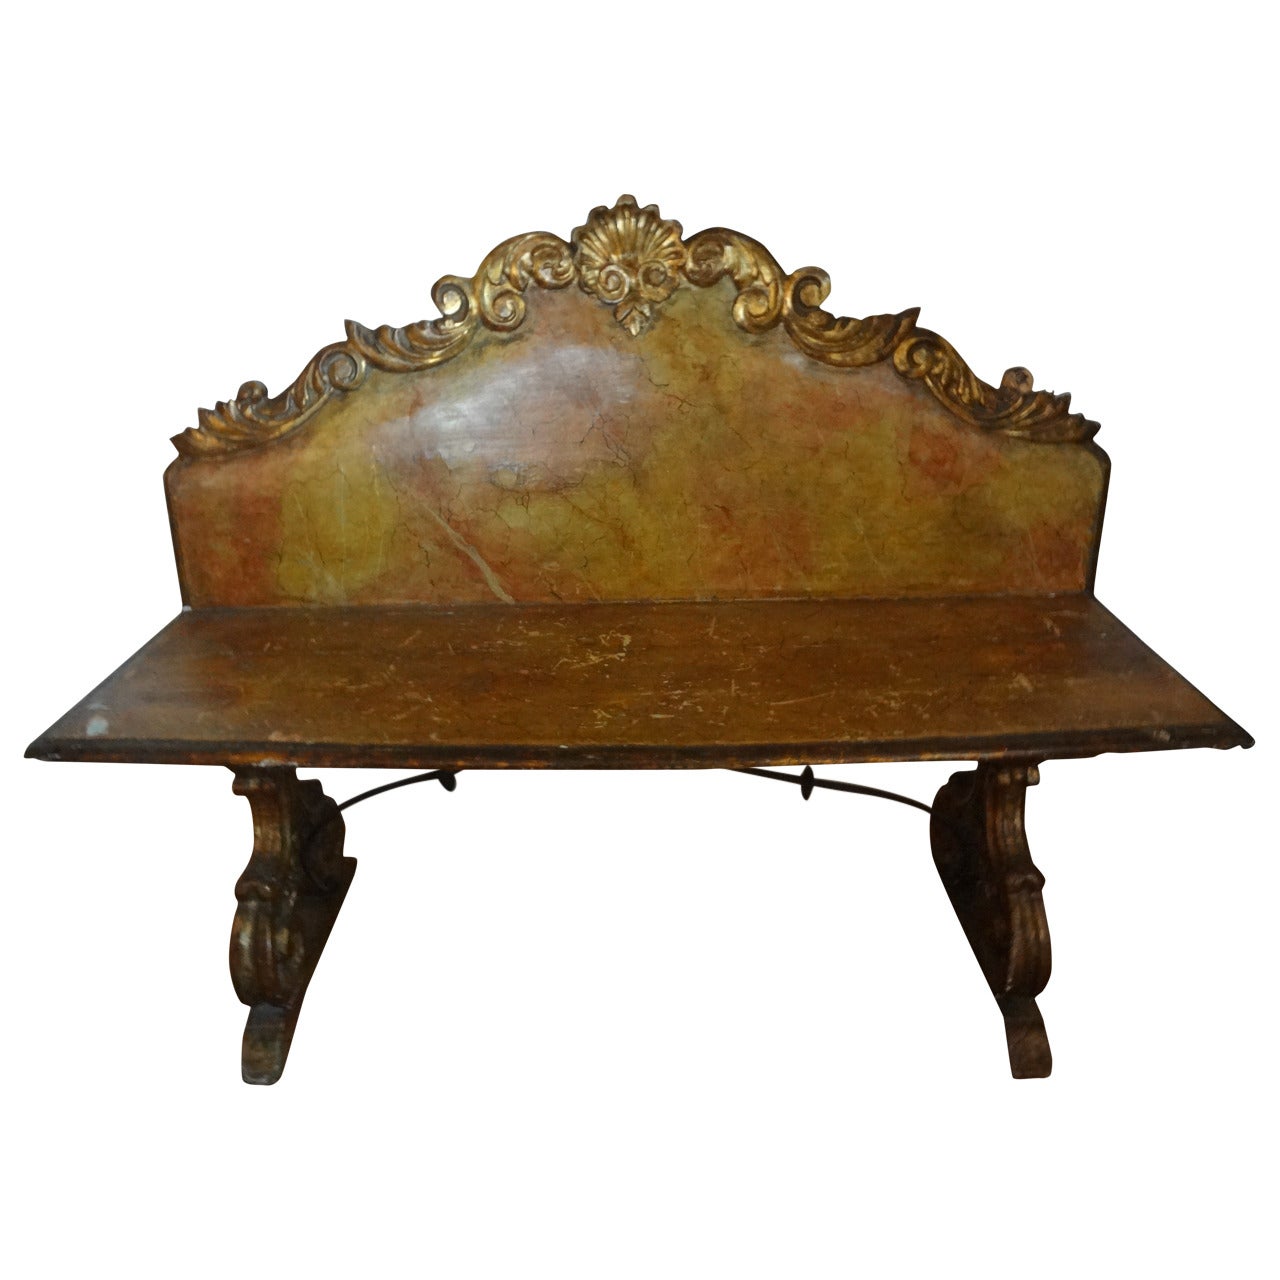 18th Century Venetian Painted and Gilt Wood Bench With Iron Stretcher